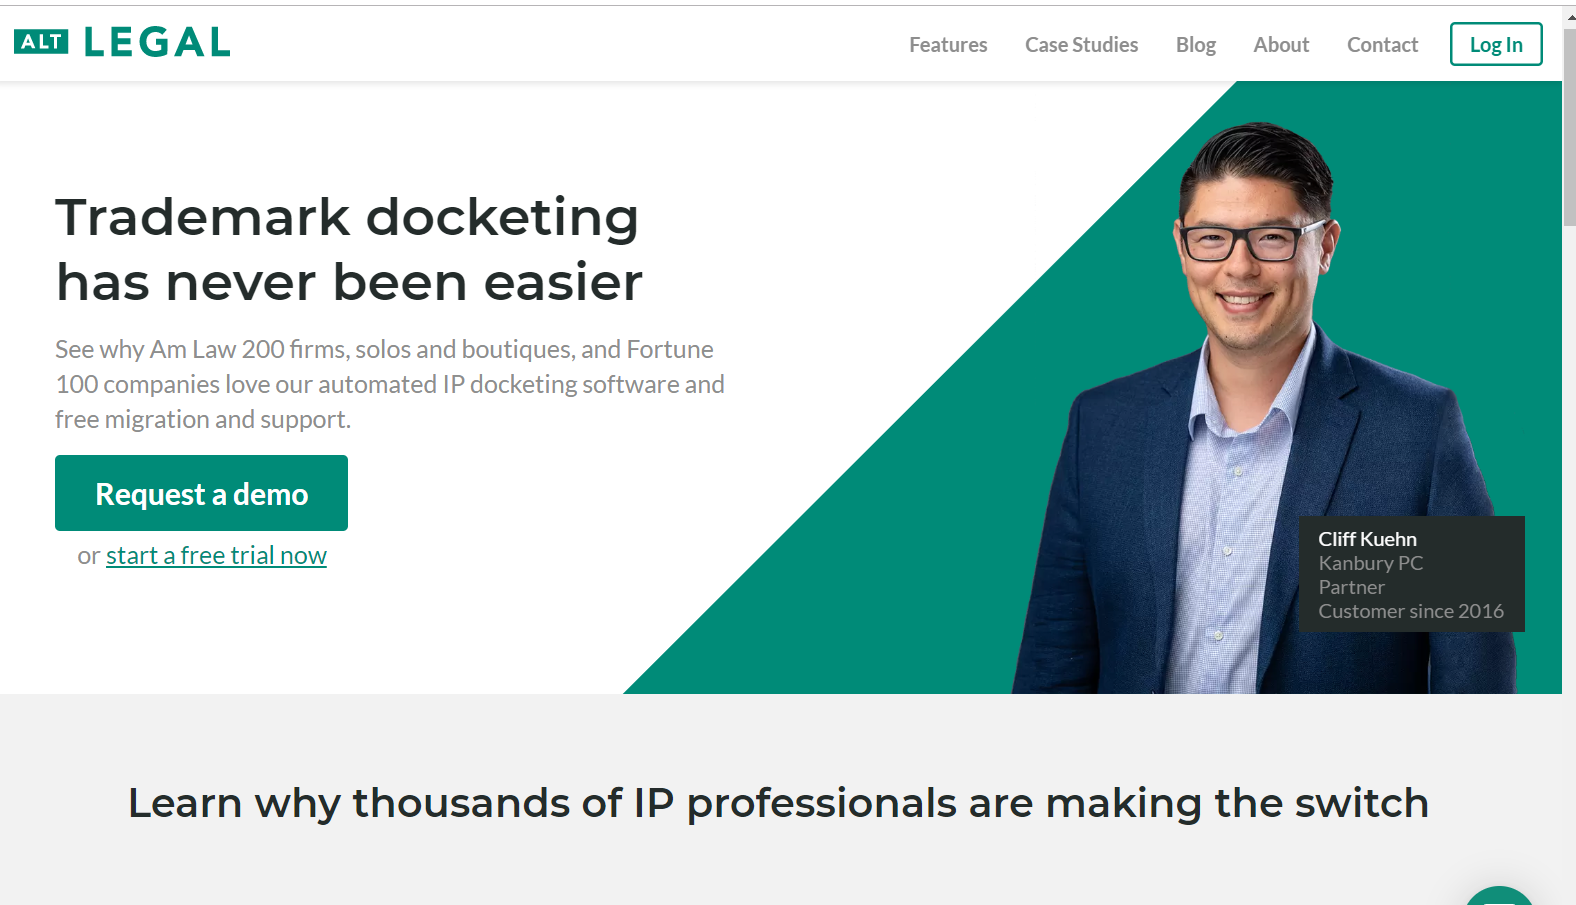 IP Docketing Company Alt Legal Makes An Acquisition and Announces Its First User Conference